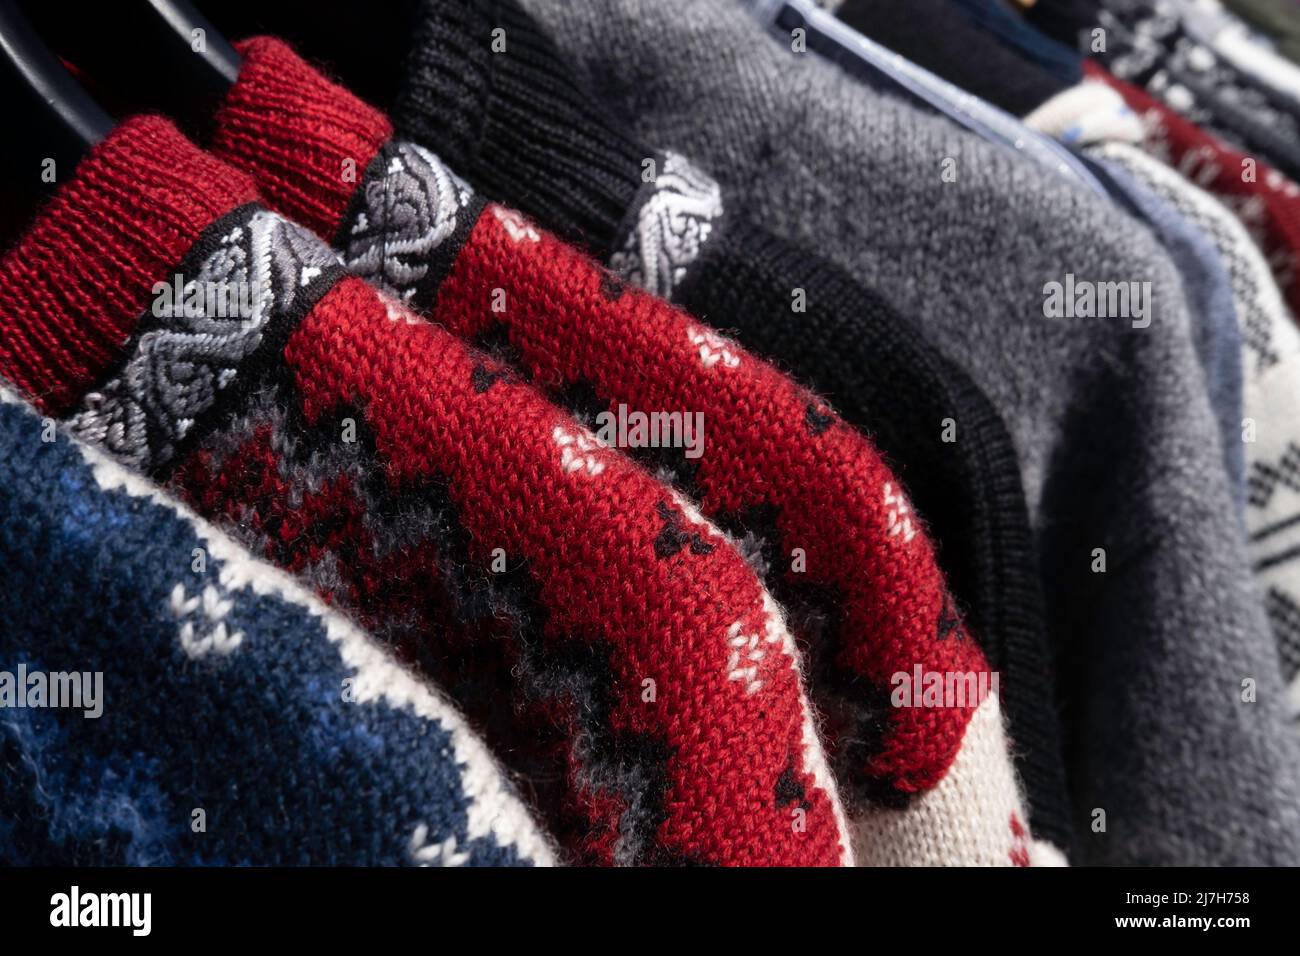 Handmade woolen Scandinavian ladies cardigans, Norwegian style sweater in all kinds of colors and patterns, in an open air market stall Stock Photo